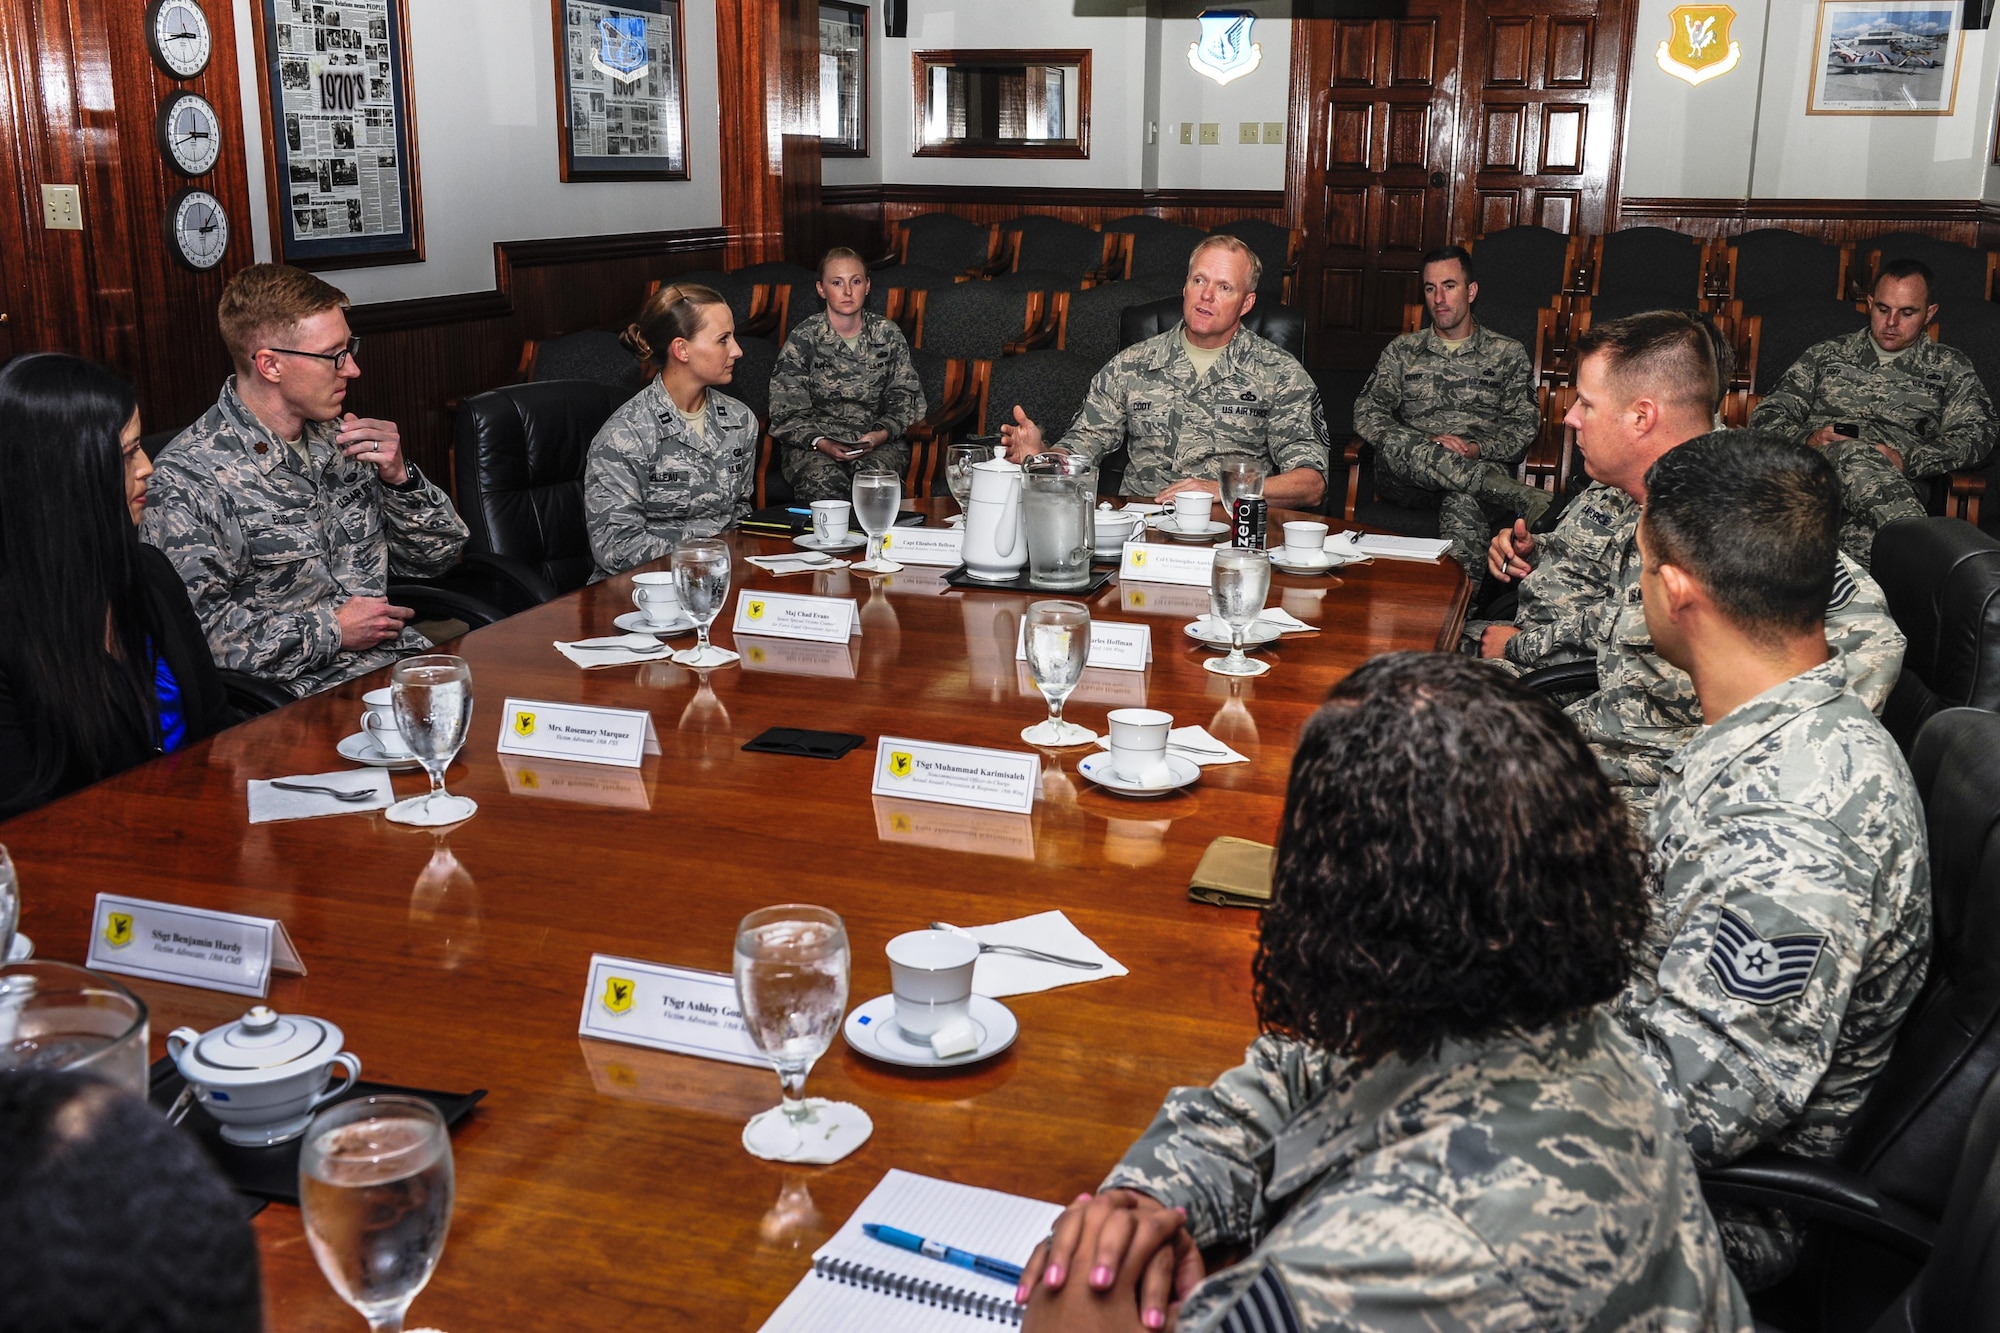 Chief Master Sgt. of the Air Force James Cody discusses sexual assault prevention and response during a round table discussion, July 7, 2015, at Kadena Air Base, Japan. Cody, along with  members of Kadena’s SAPR team, Victim Advocates and Special Victims Council talked about strategies to help eliminate sexual assault from the Air Force community. The Air Force has a zero tolerance policy on sexual assault and harassment. (U.S. Air Force photo by Airman 1st Class John Linzmeier/Released)